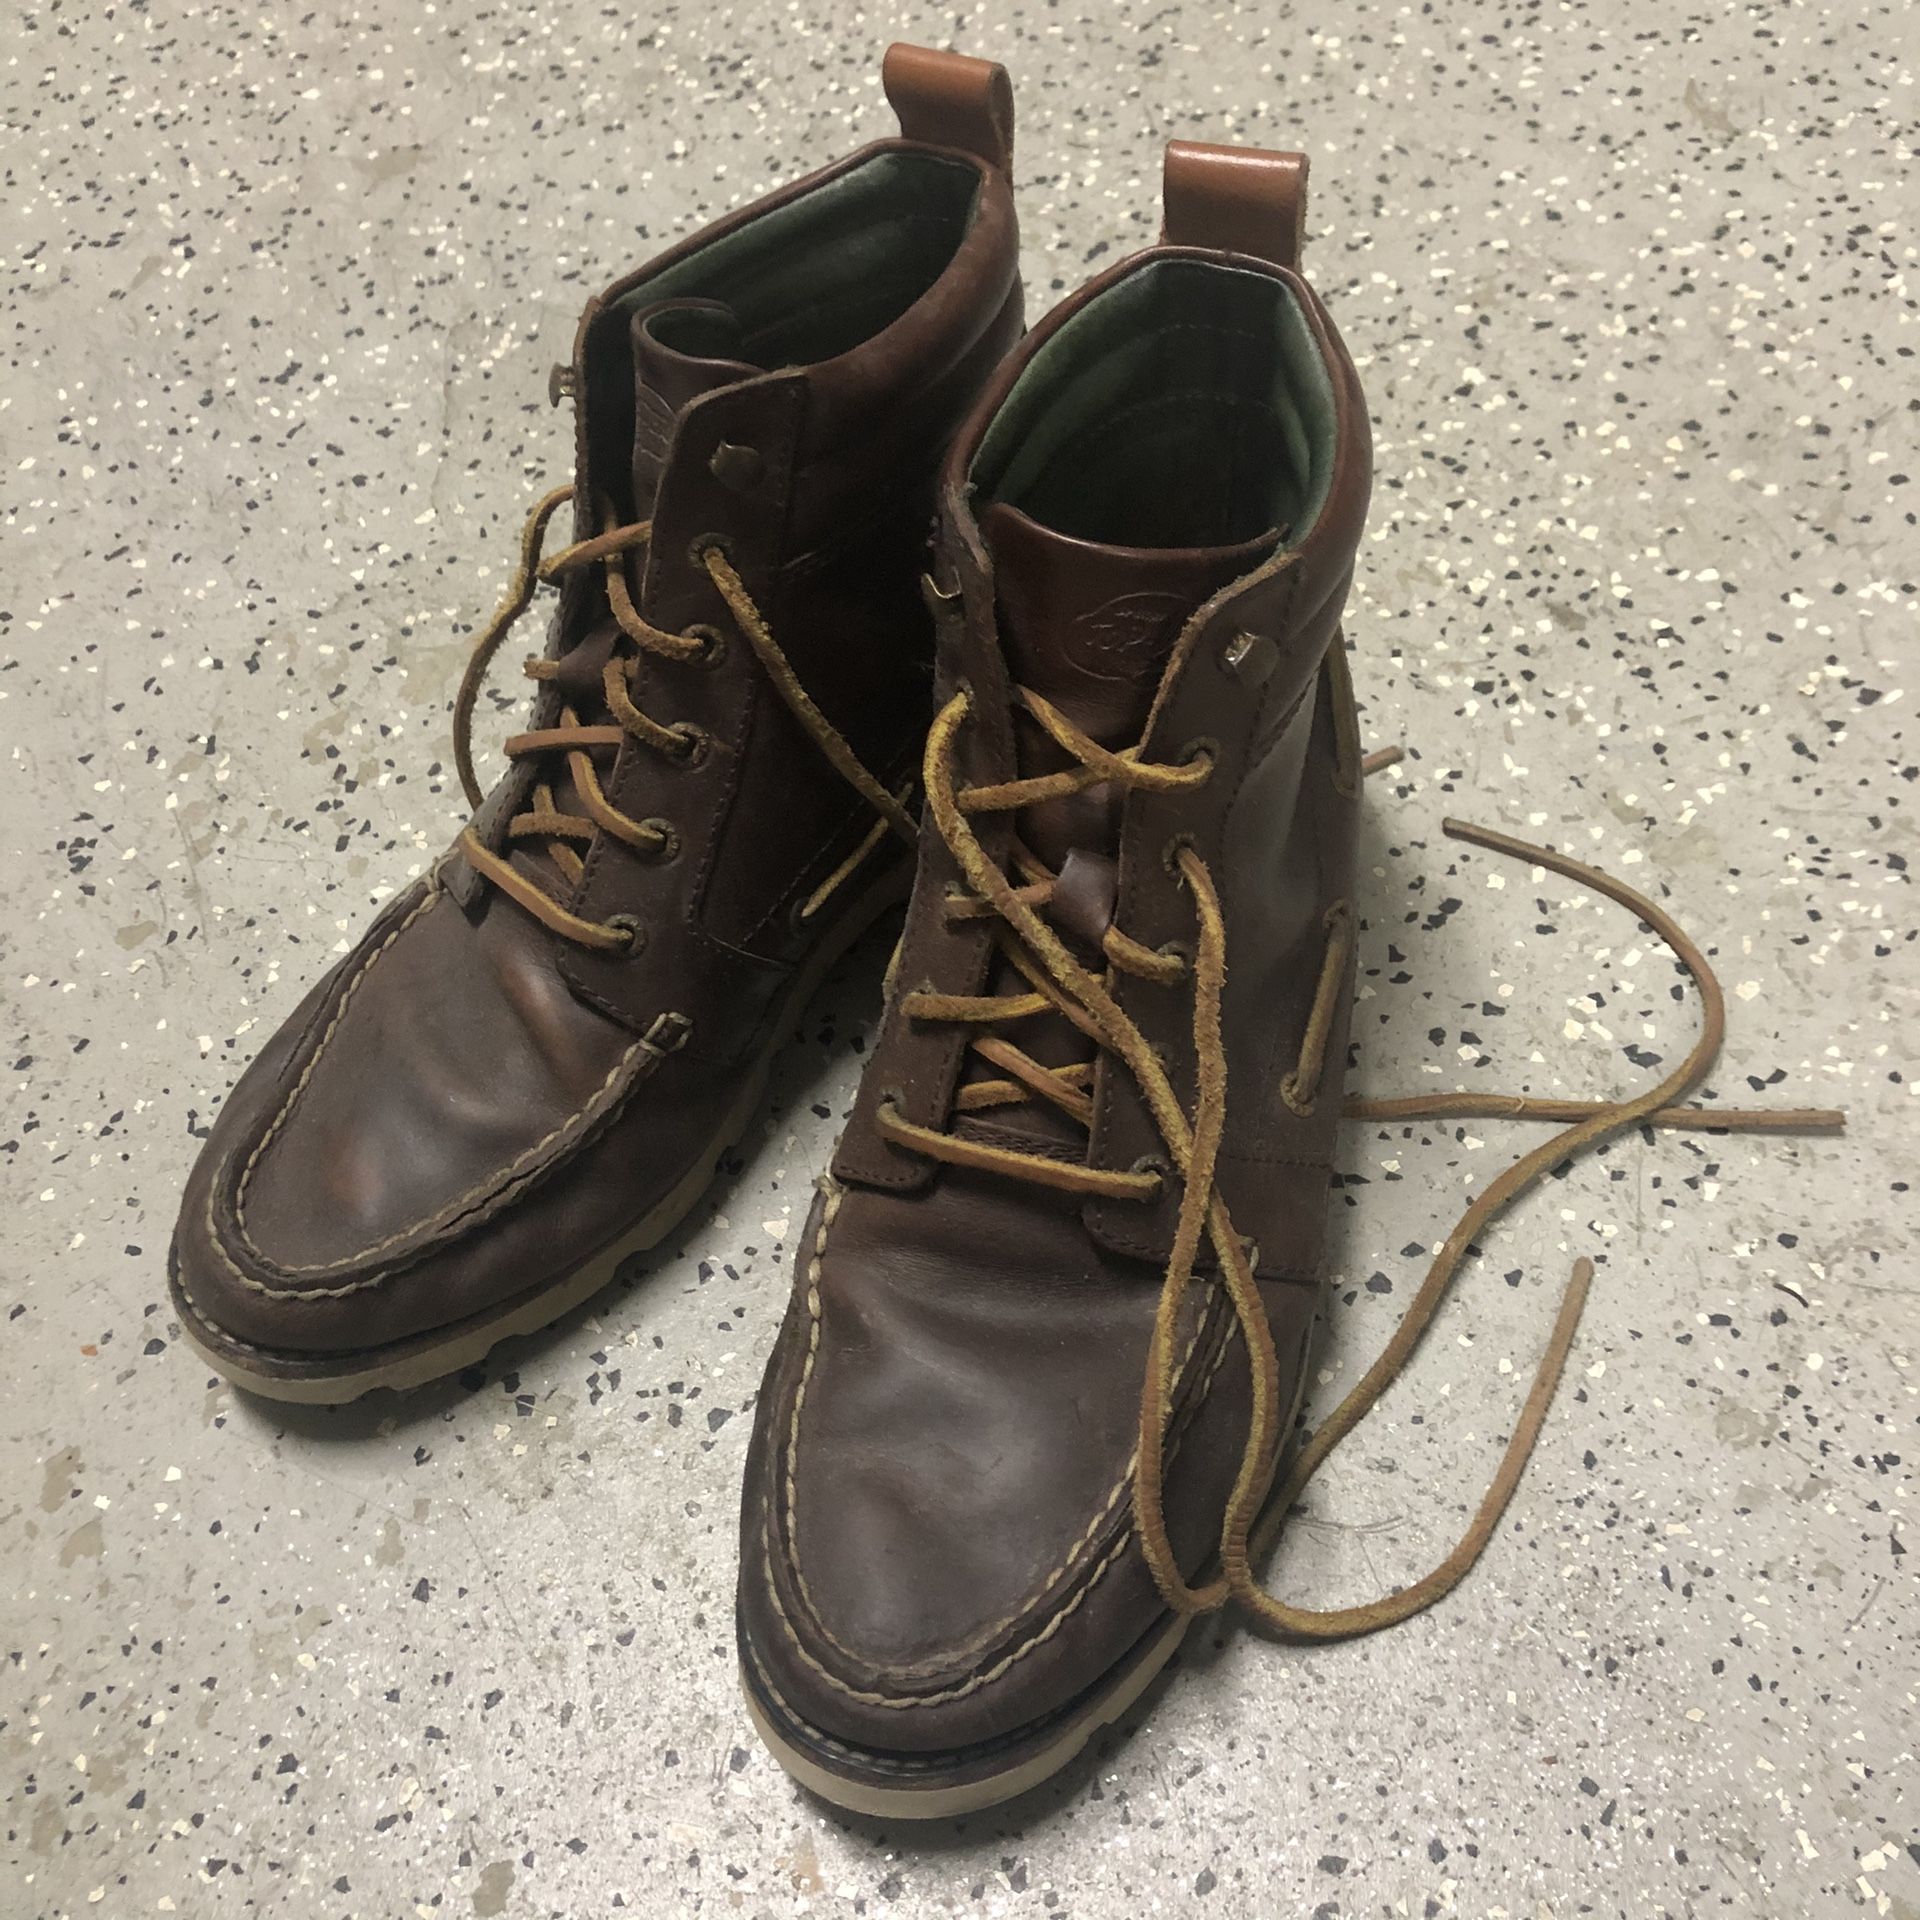 Sperry Top Sider Boots - 9.5 Men’s